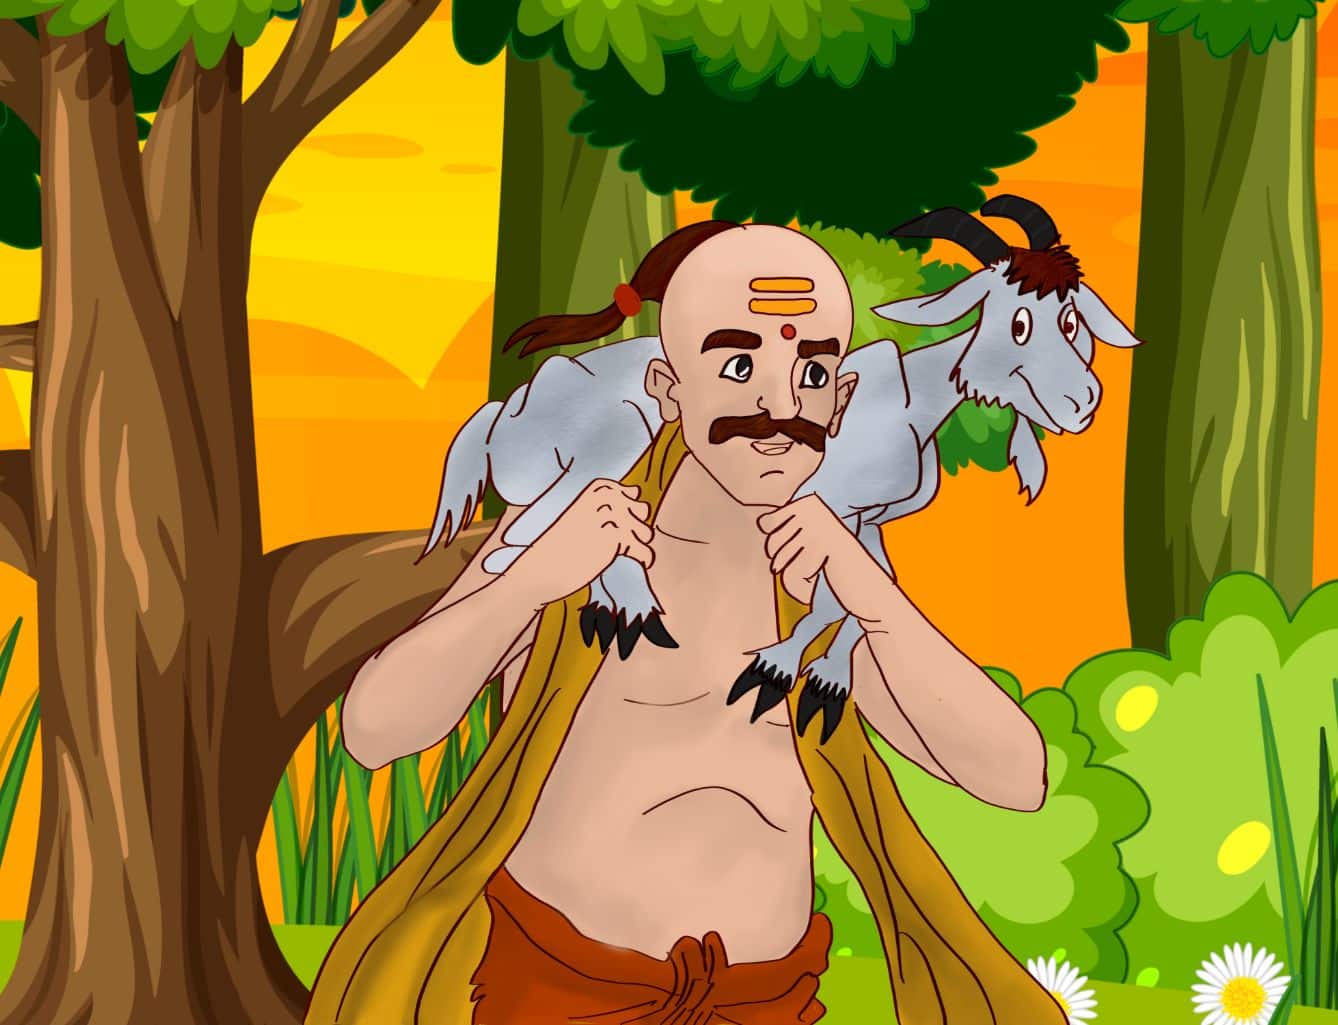 Panchatantra Stories-The brahmin and the goat